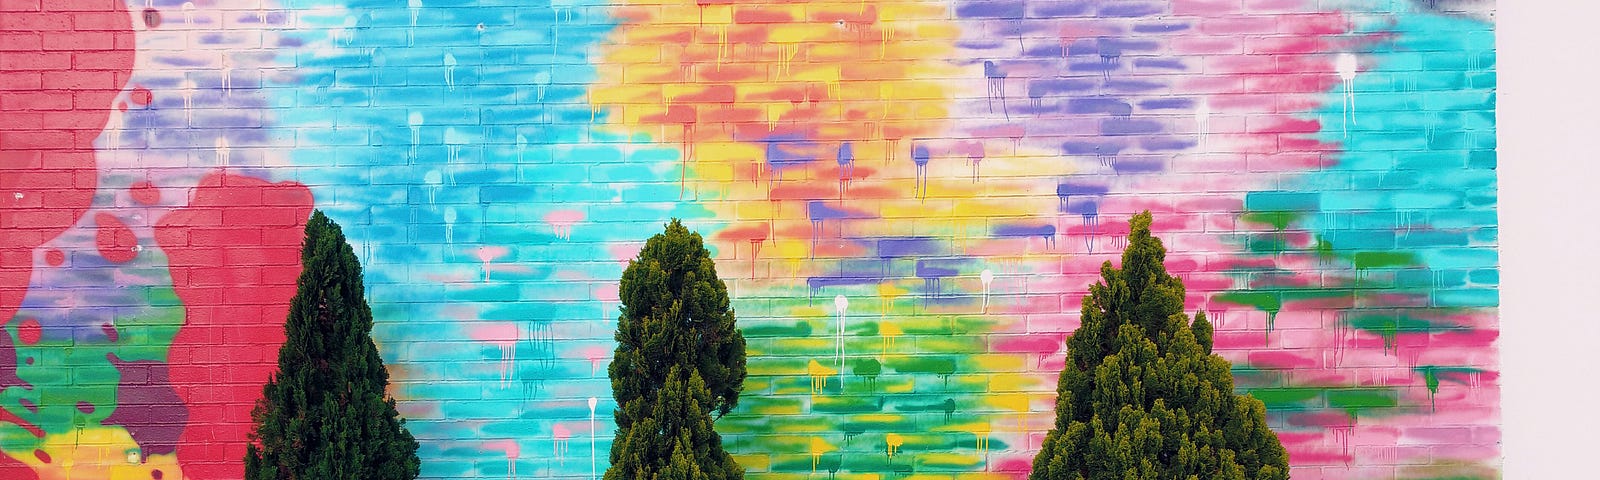 The image shows a vibrant, colorful mural on a wall, with the artwork giving the impression of an abstract sunset with blue sky above and various colors blending into each other. In front of this mural, there are real, three-dimensional shrubs and plants, which include several conical trees and a row of bushy plants with pink flowers, adding a layer of life in contrast to the painted wall. This juxtaposition of living plants against the wall creates a playful interplay between art and nature.